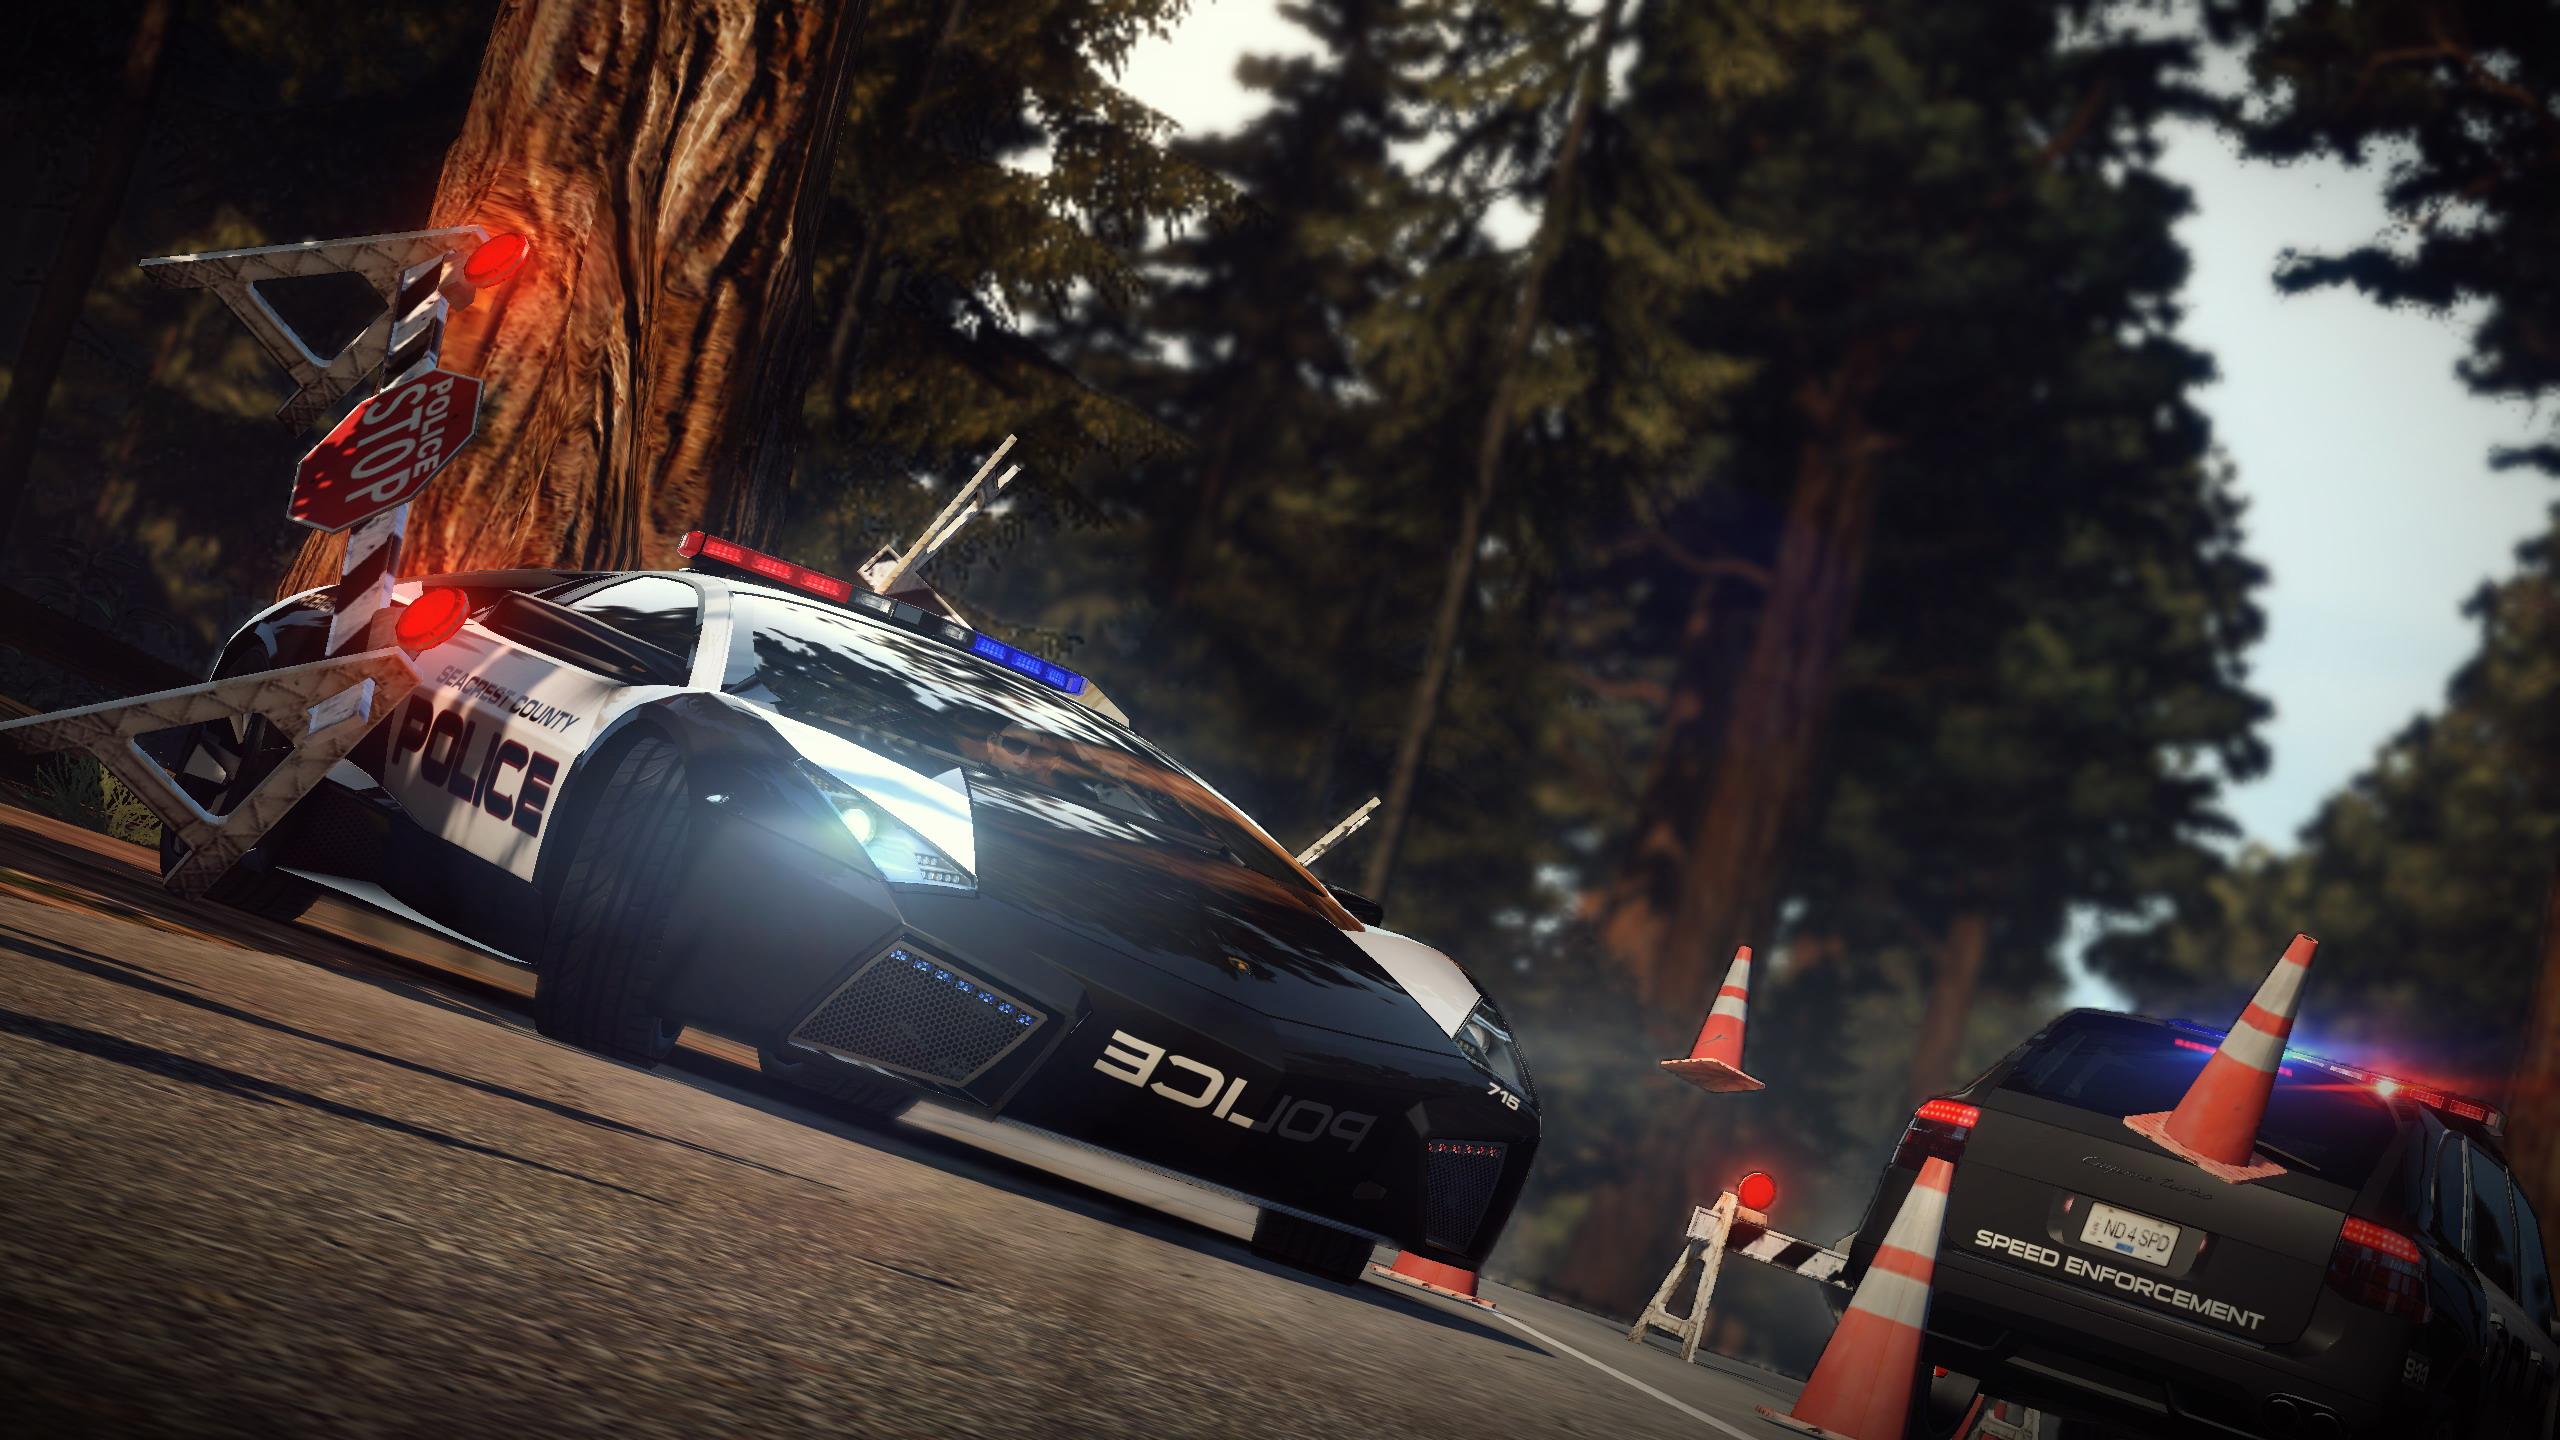 Need For Speed: Hot Pursuit HD Wallpaper and Background Image